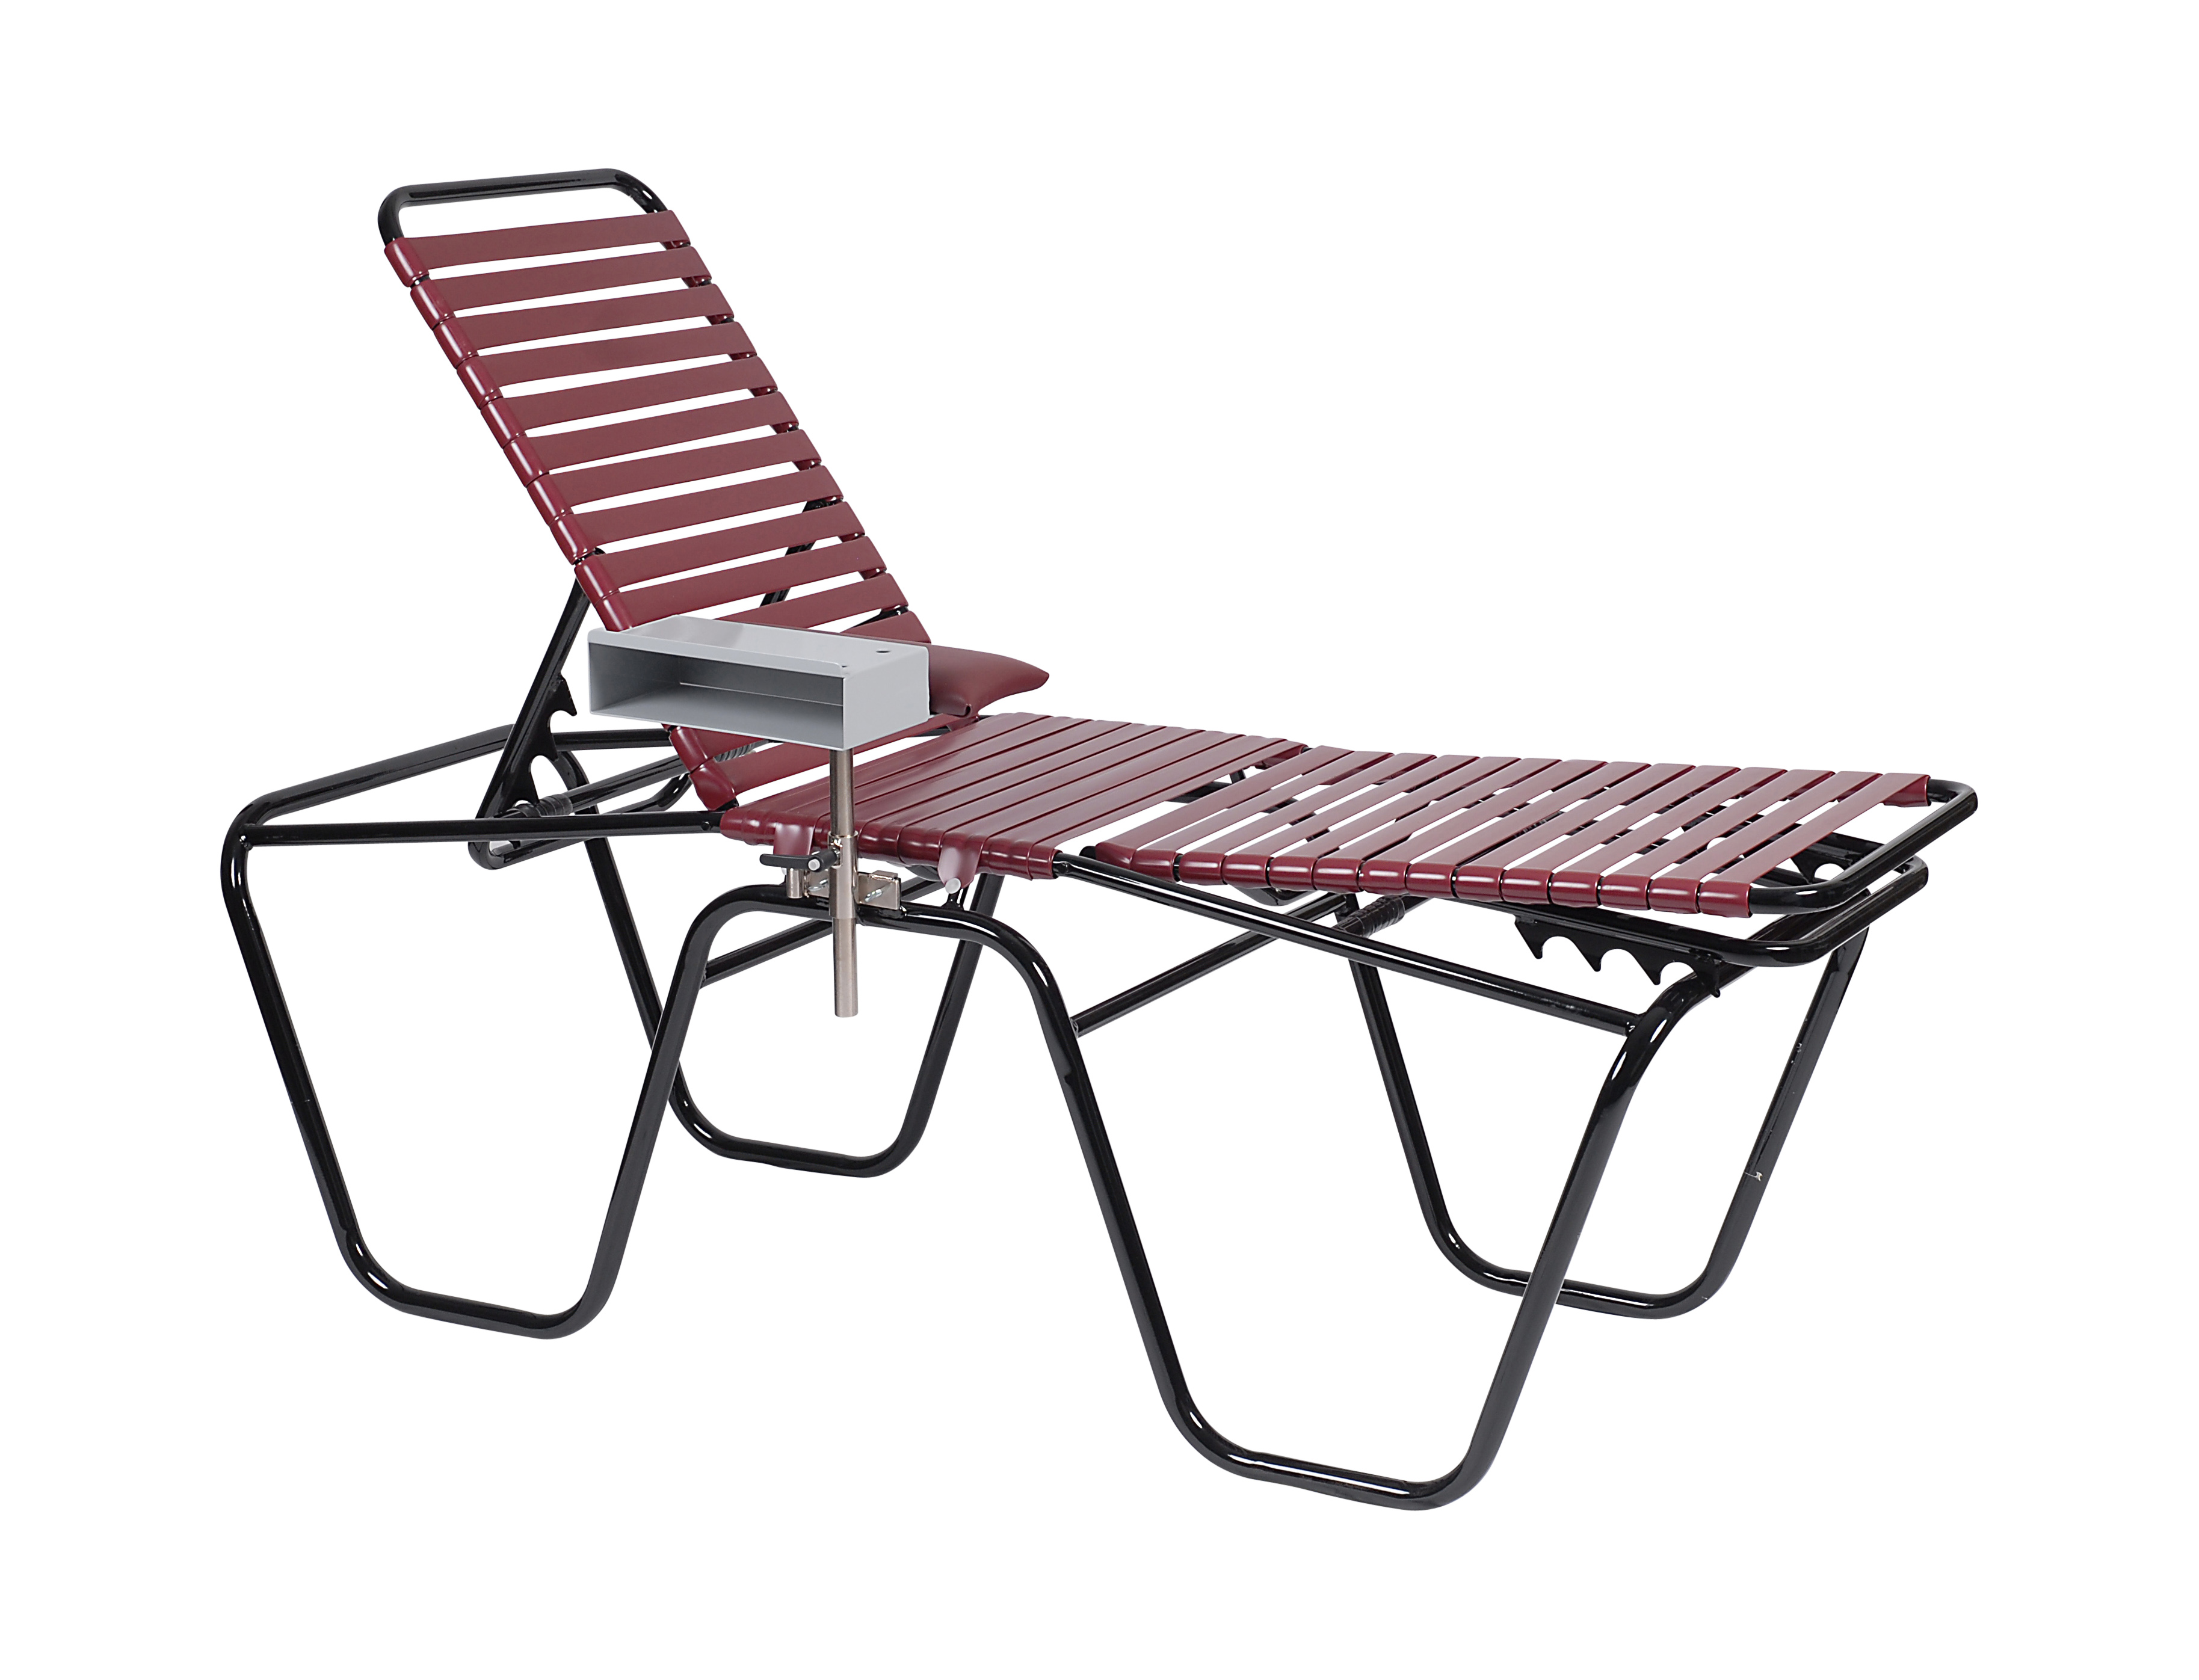 Portable Donor Bed - Burgundy/Black 